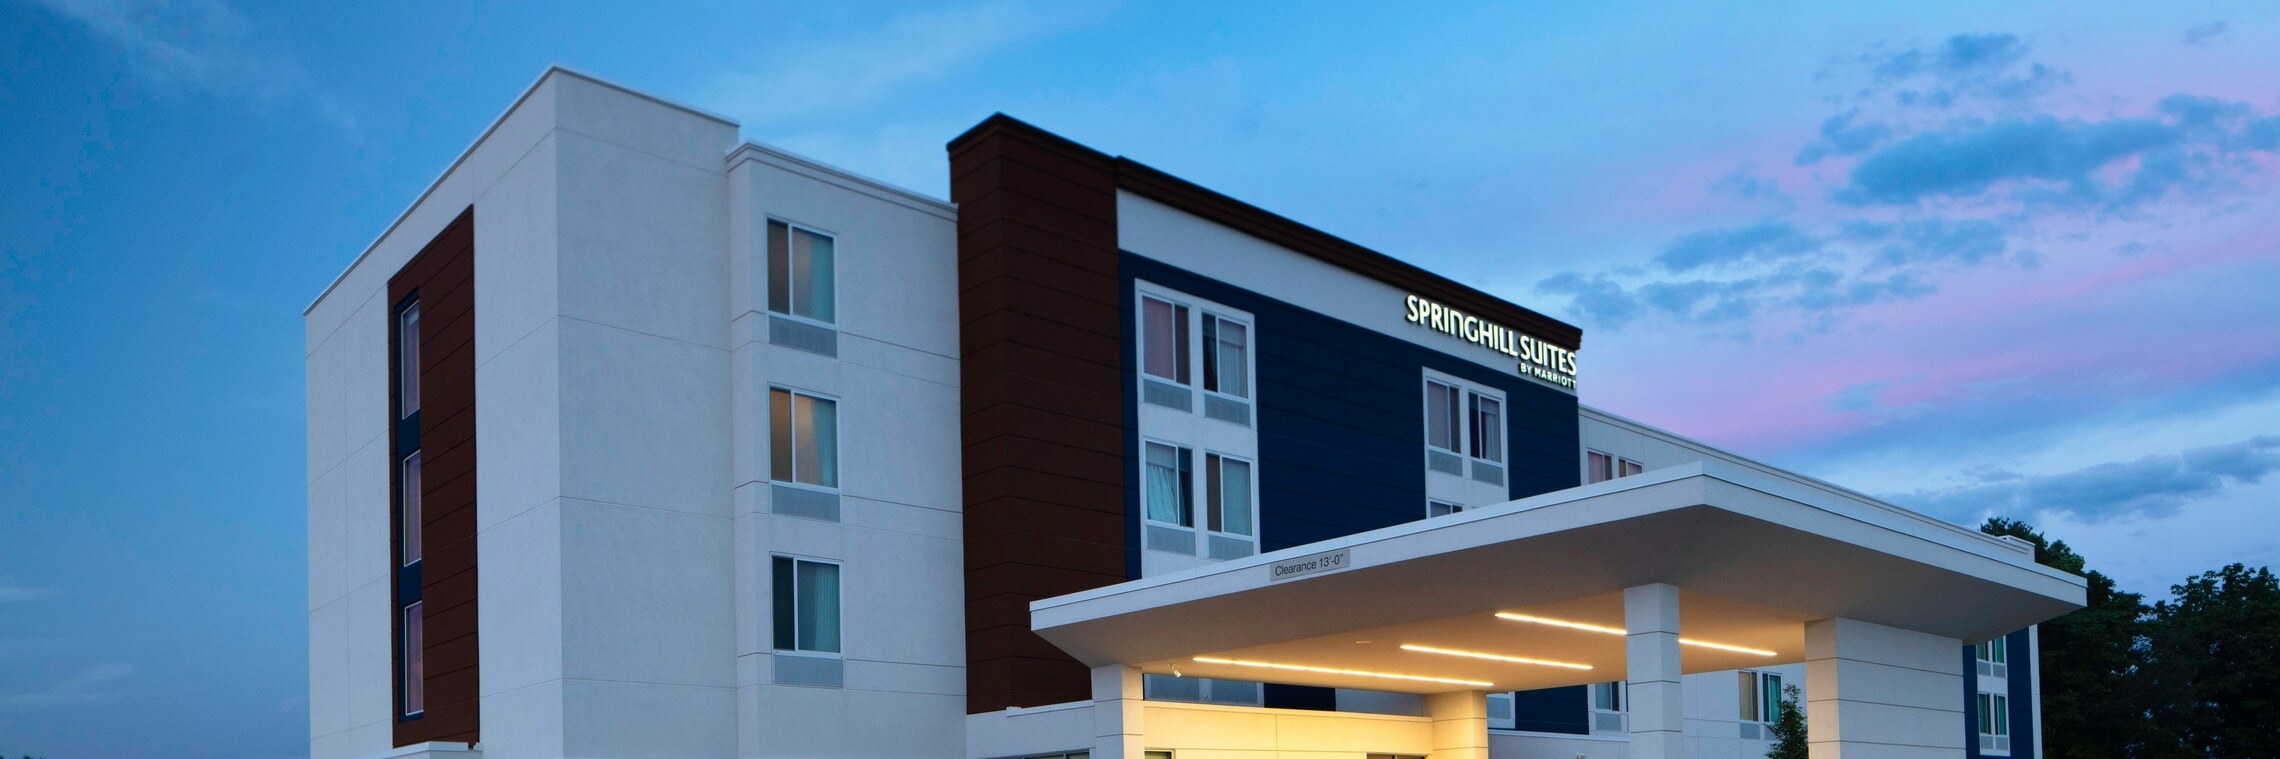 Photo of Springhill Suites Winchester, Winchester, VA